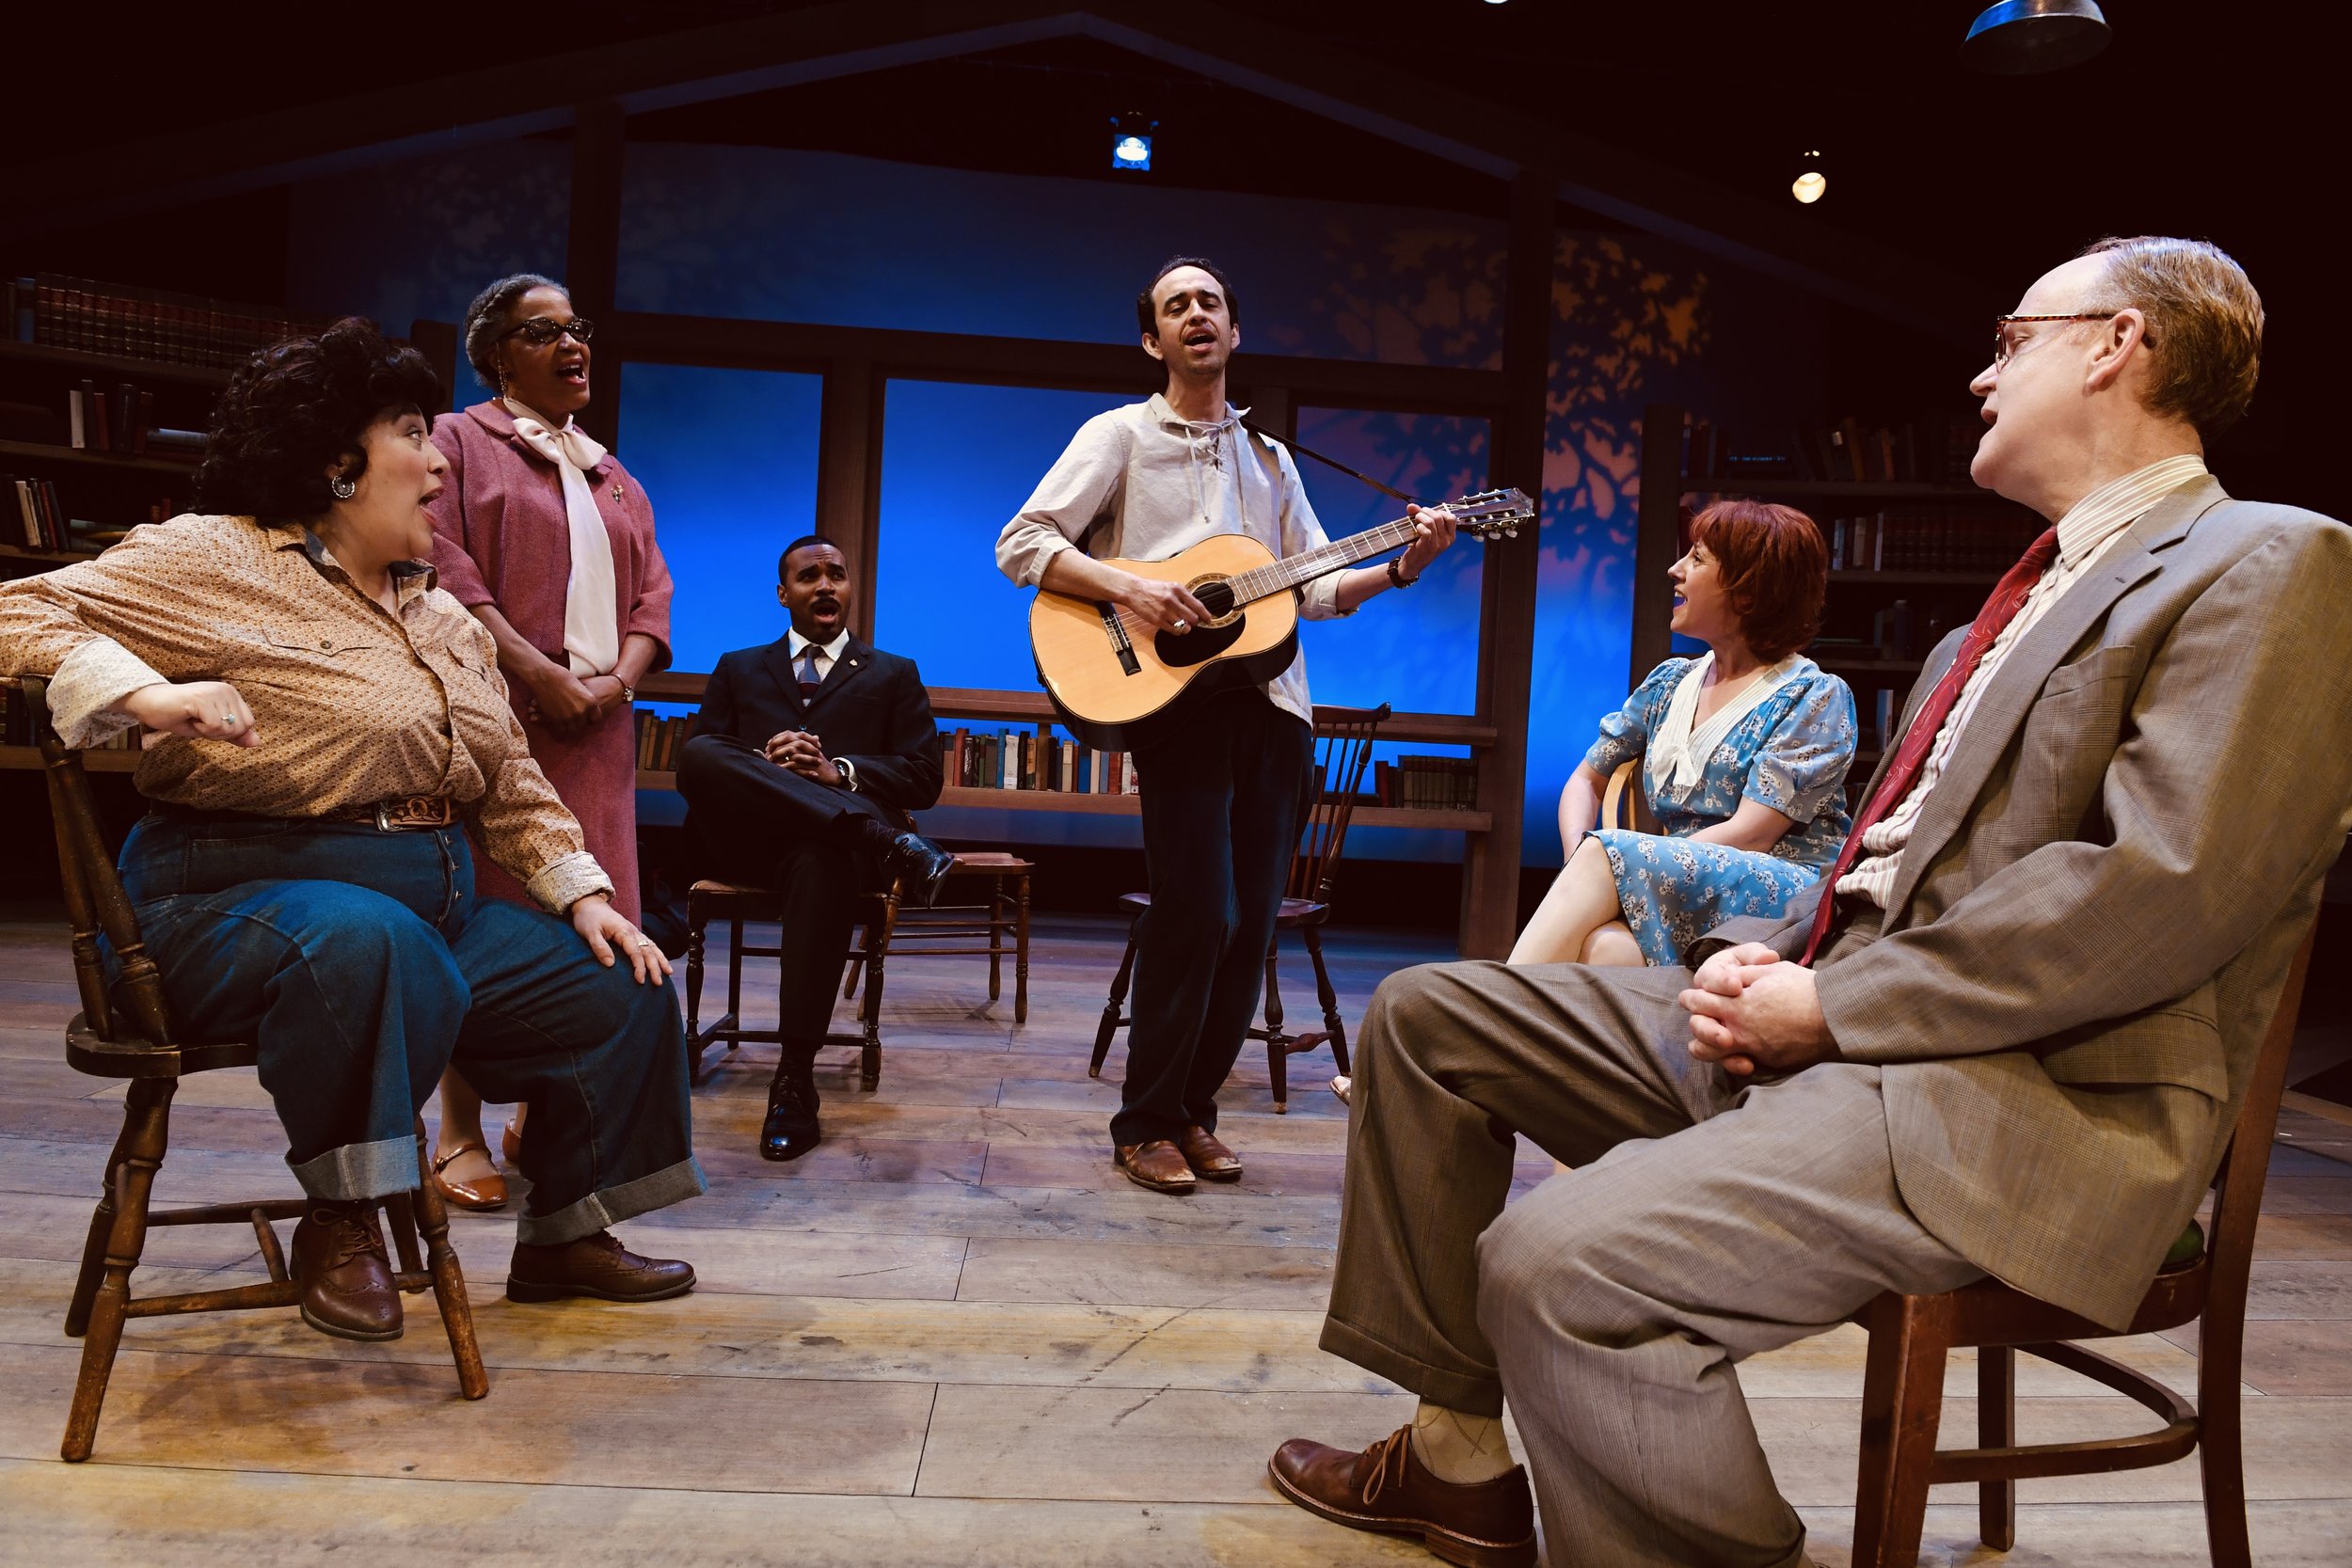  San Jose Stage Company’s West Coast Premiere of PEOPLE WHERE THEY ARE by ANTHONY CLARVOE. Directed BENNY SATO AMBUSH featuring (left to right) ESTRELLA ESPARZA-JOHNSON* as EMMA, CATHLEEN RIDDLEY* as MRS. CLARK, TERRANCE AUSTIN SMITH* as JOHN, BRADY 